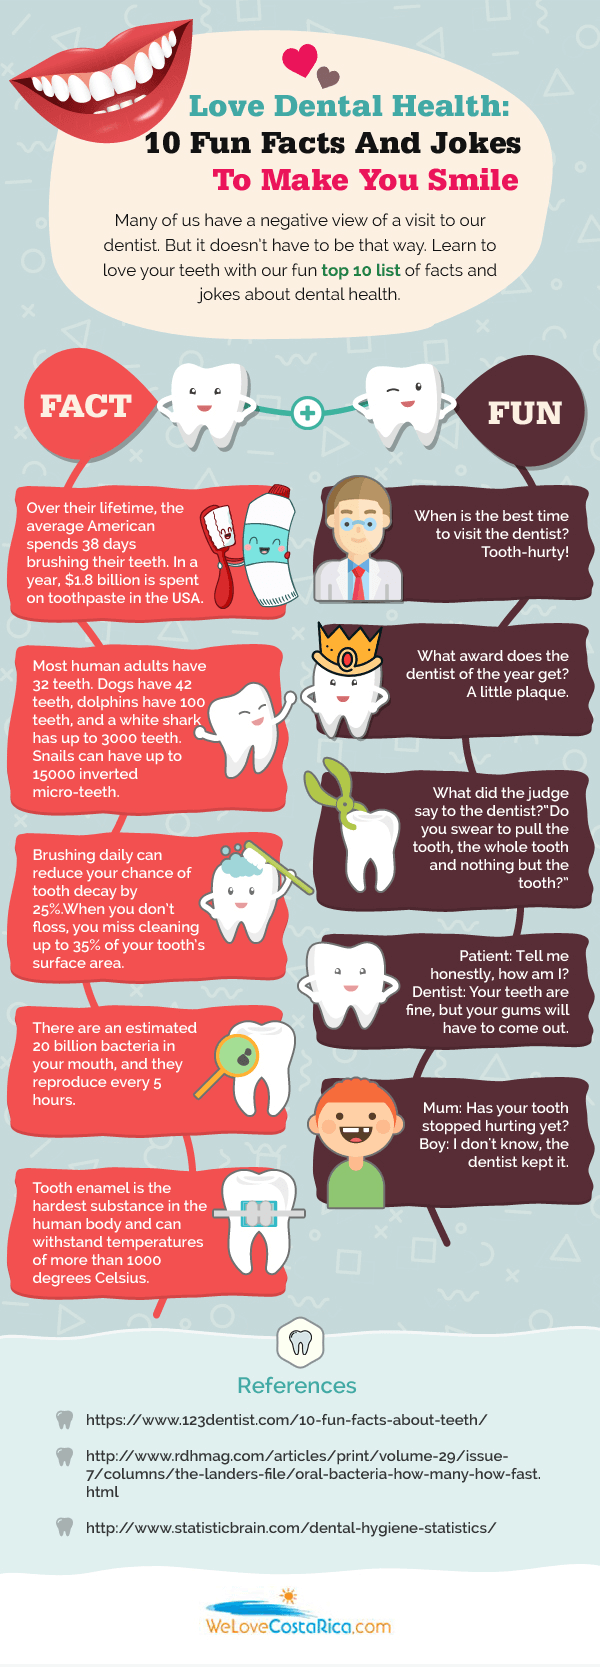 Love Dental Health: 10 Fun Facts And Jokes To Make You Smile